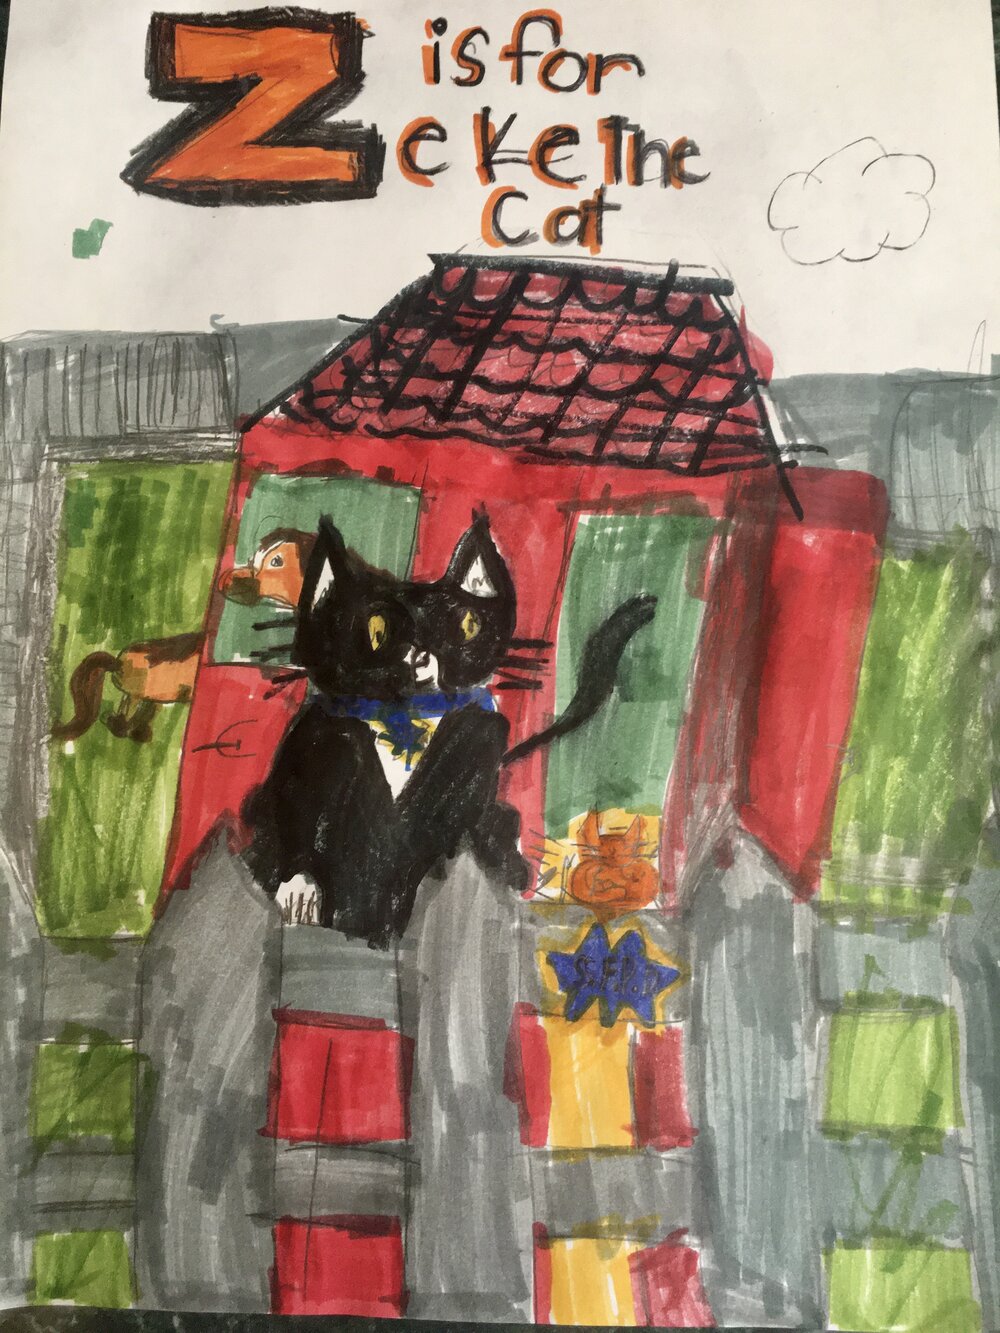 Z is for Zeke the cat, by Lena